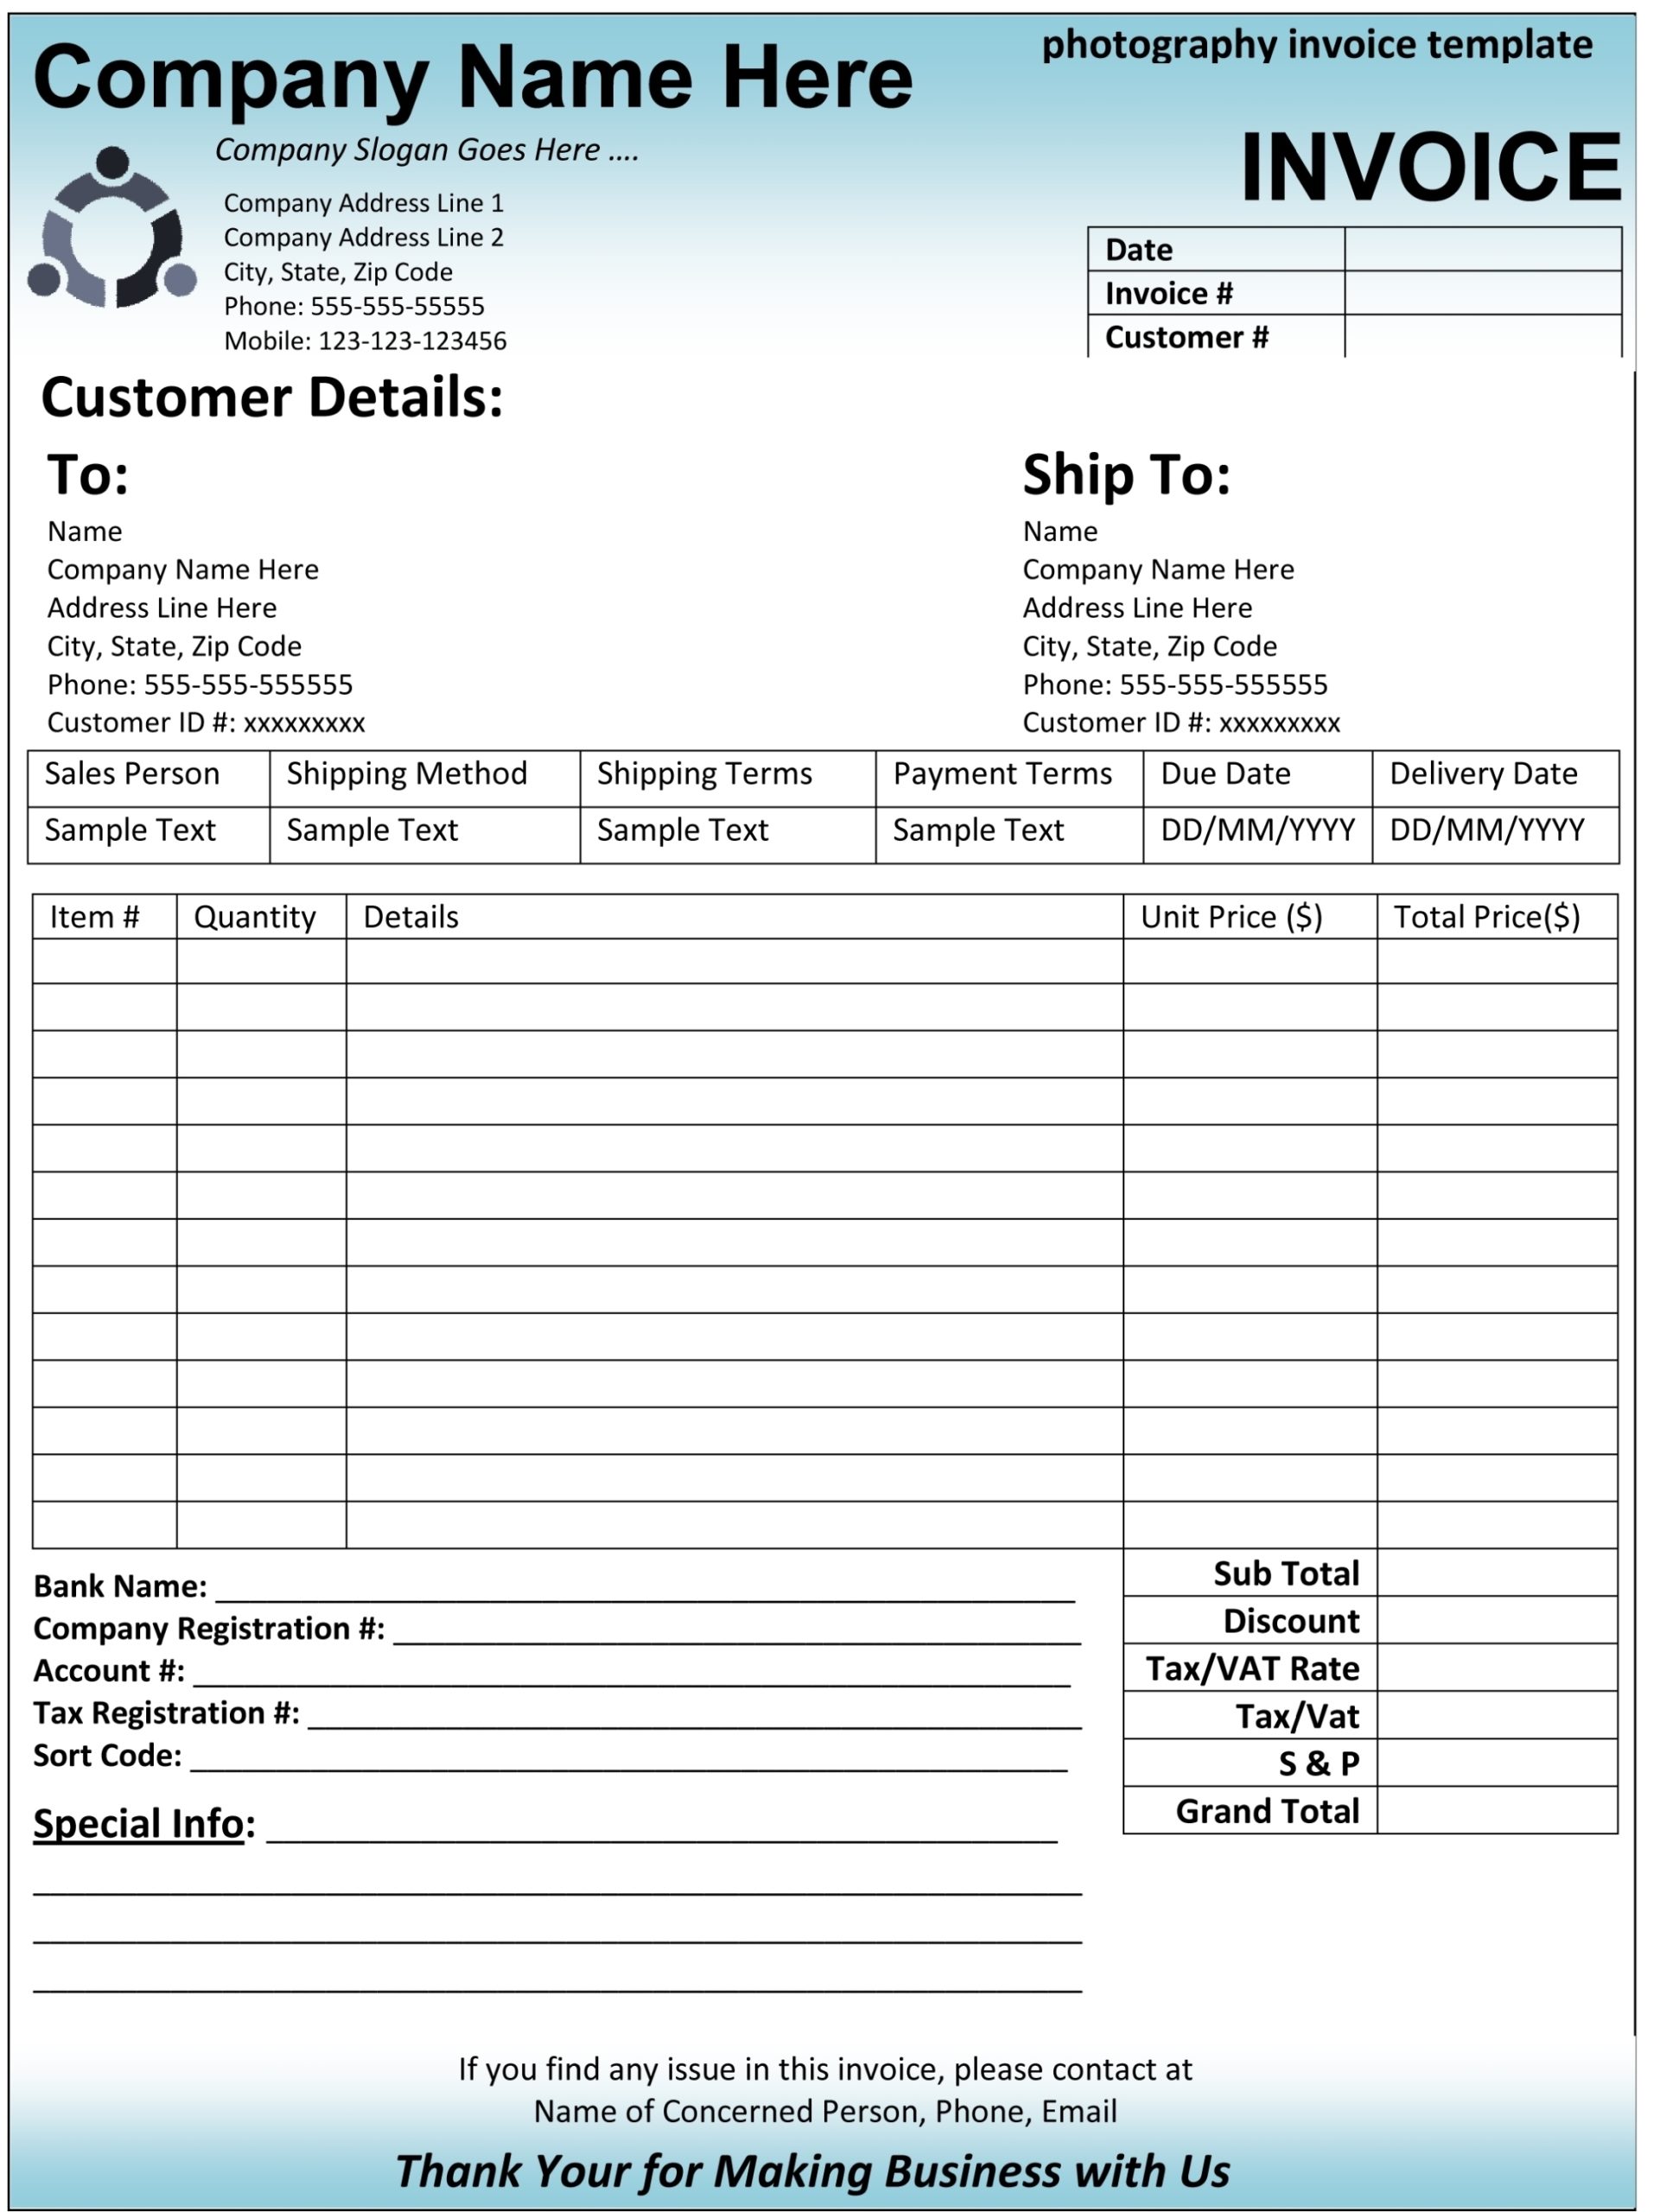 Best Invoice Template * Invoice Template Ideas With Free Business Invoice Template Downloads